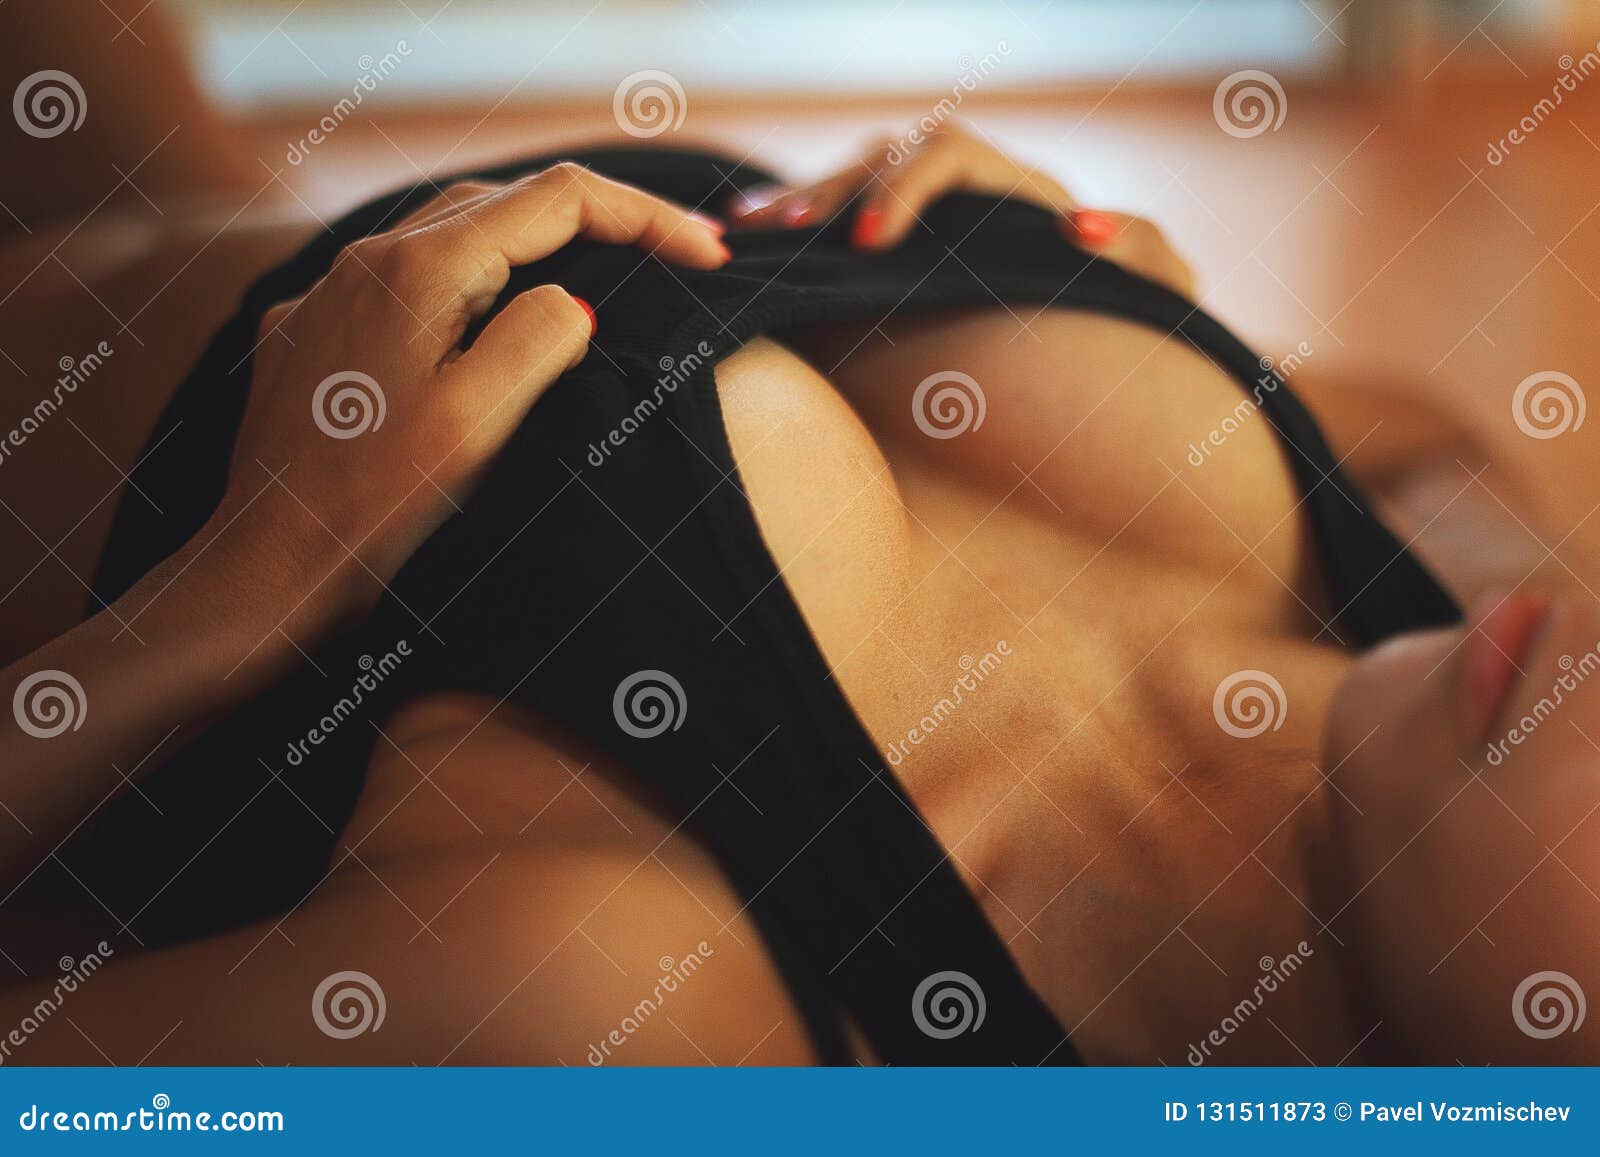 Chest Girls without Underwear with Drops. Stock Image - Image of